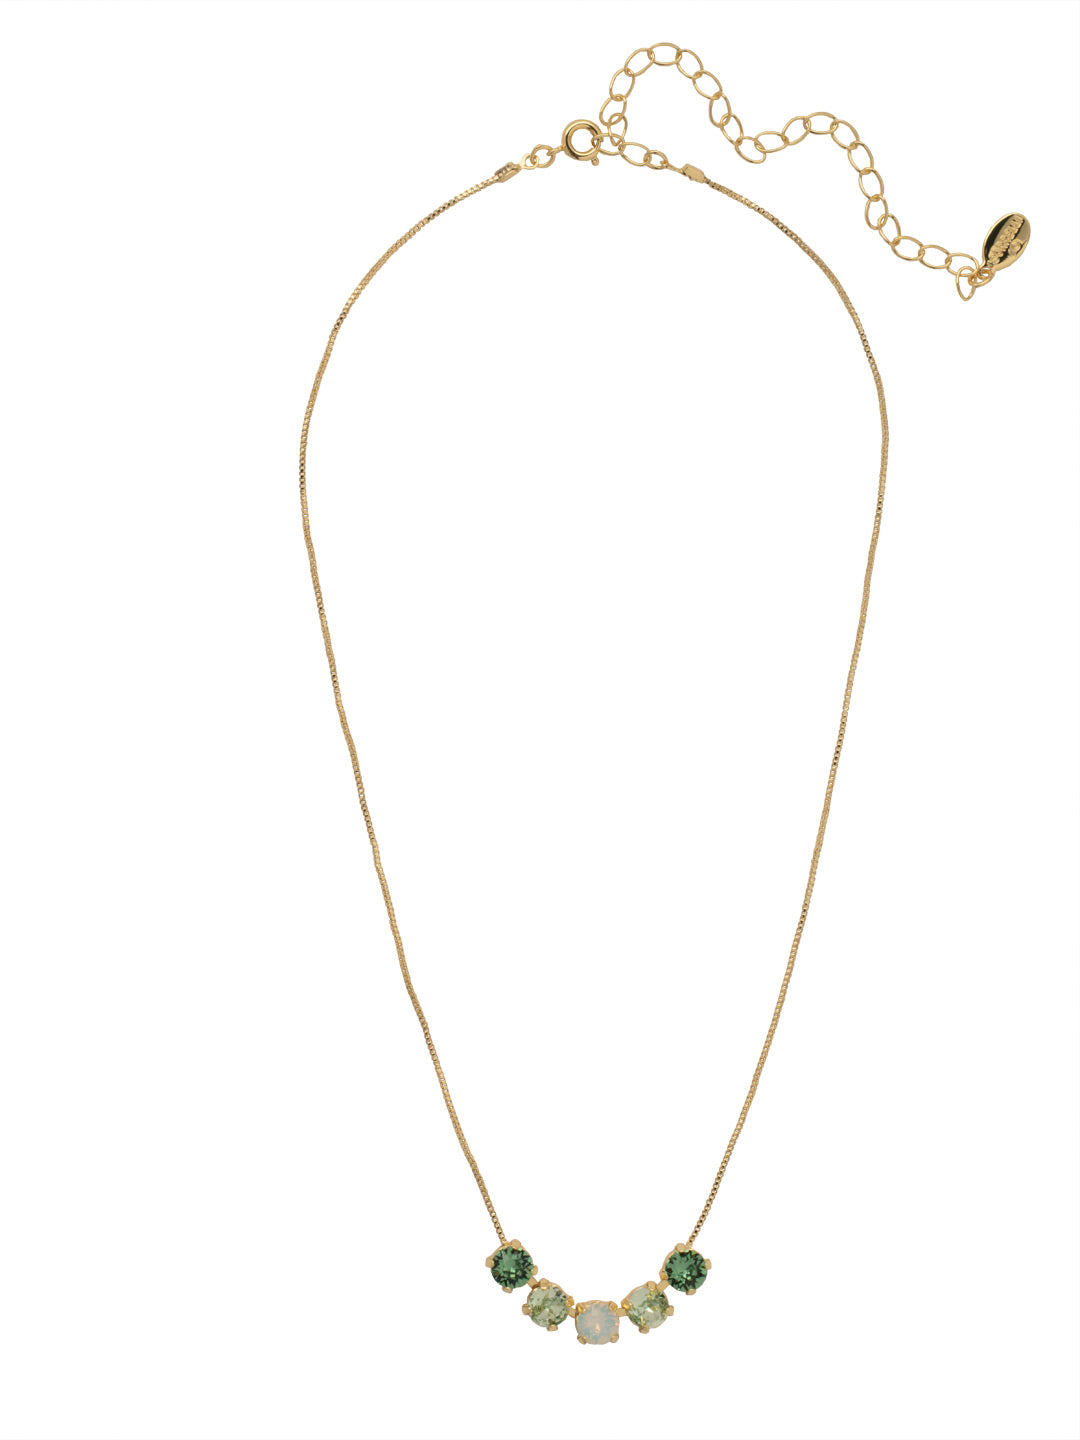 Shaughna Tennis Necklace - NFC84BGSGR - <p>The Shaughna Tennis Necklace features five crystals on a delicate adjustable chain. From Sorrelli's Sage Green collection in our Bright Gold-tone finish.</p>